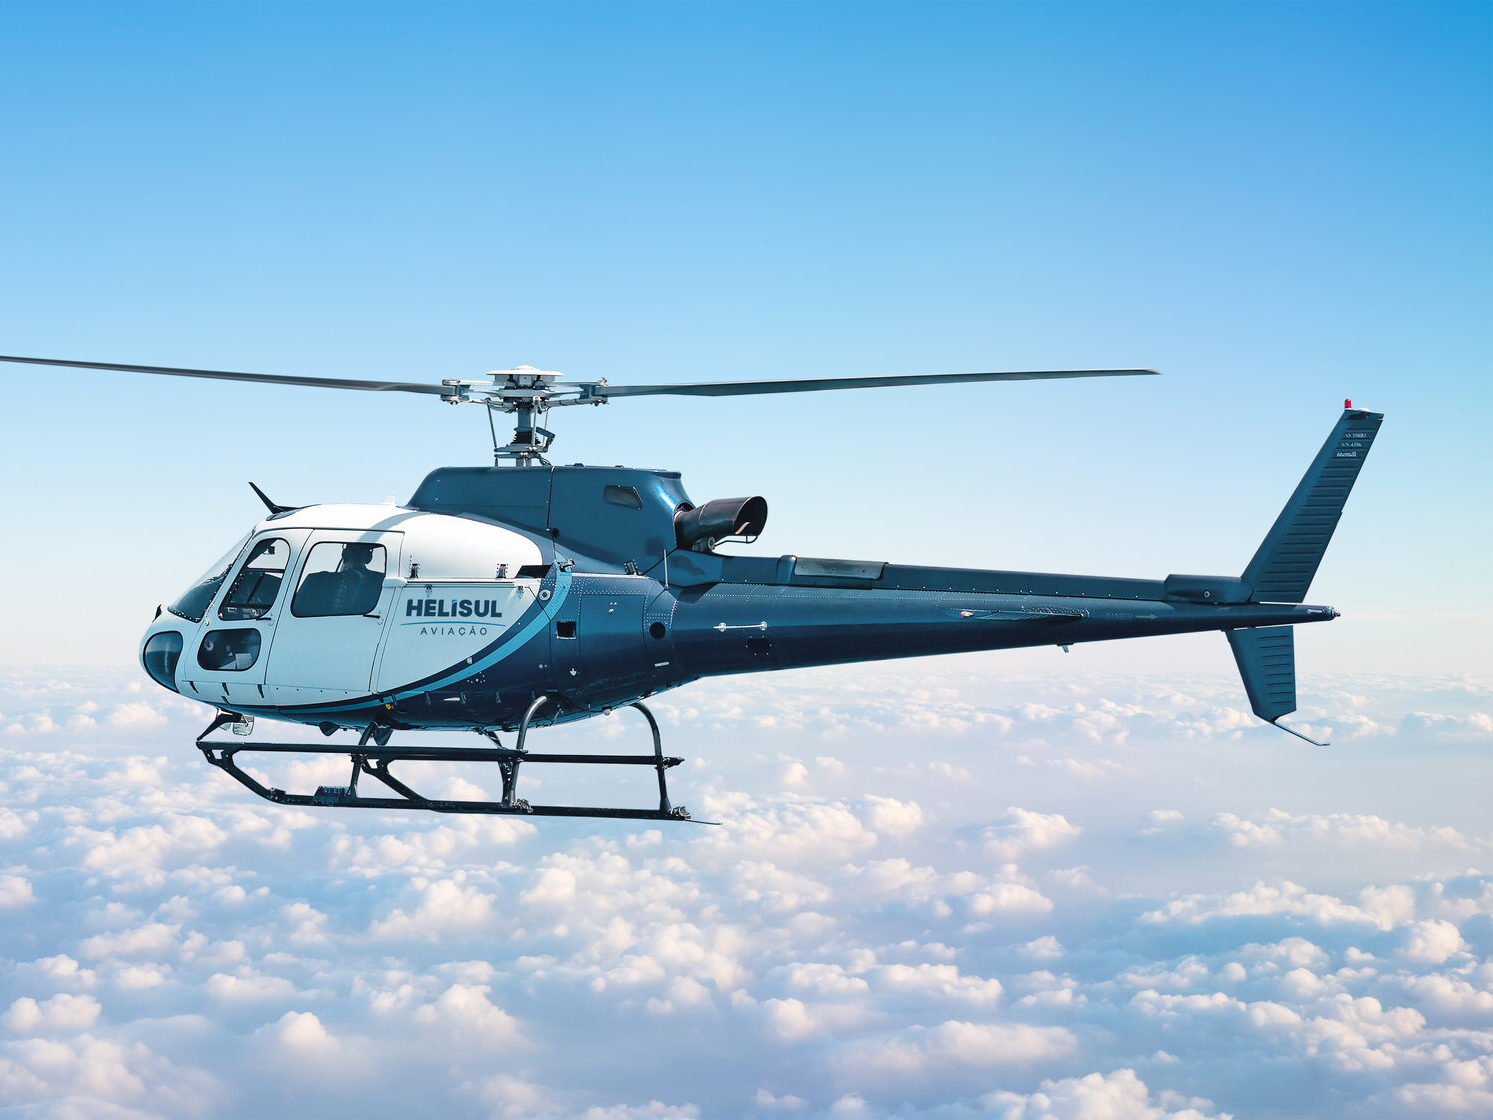 Helicopter Operator Helisul Becomes the First in the World to Roll out AI-Enhanced Fleet